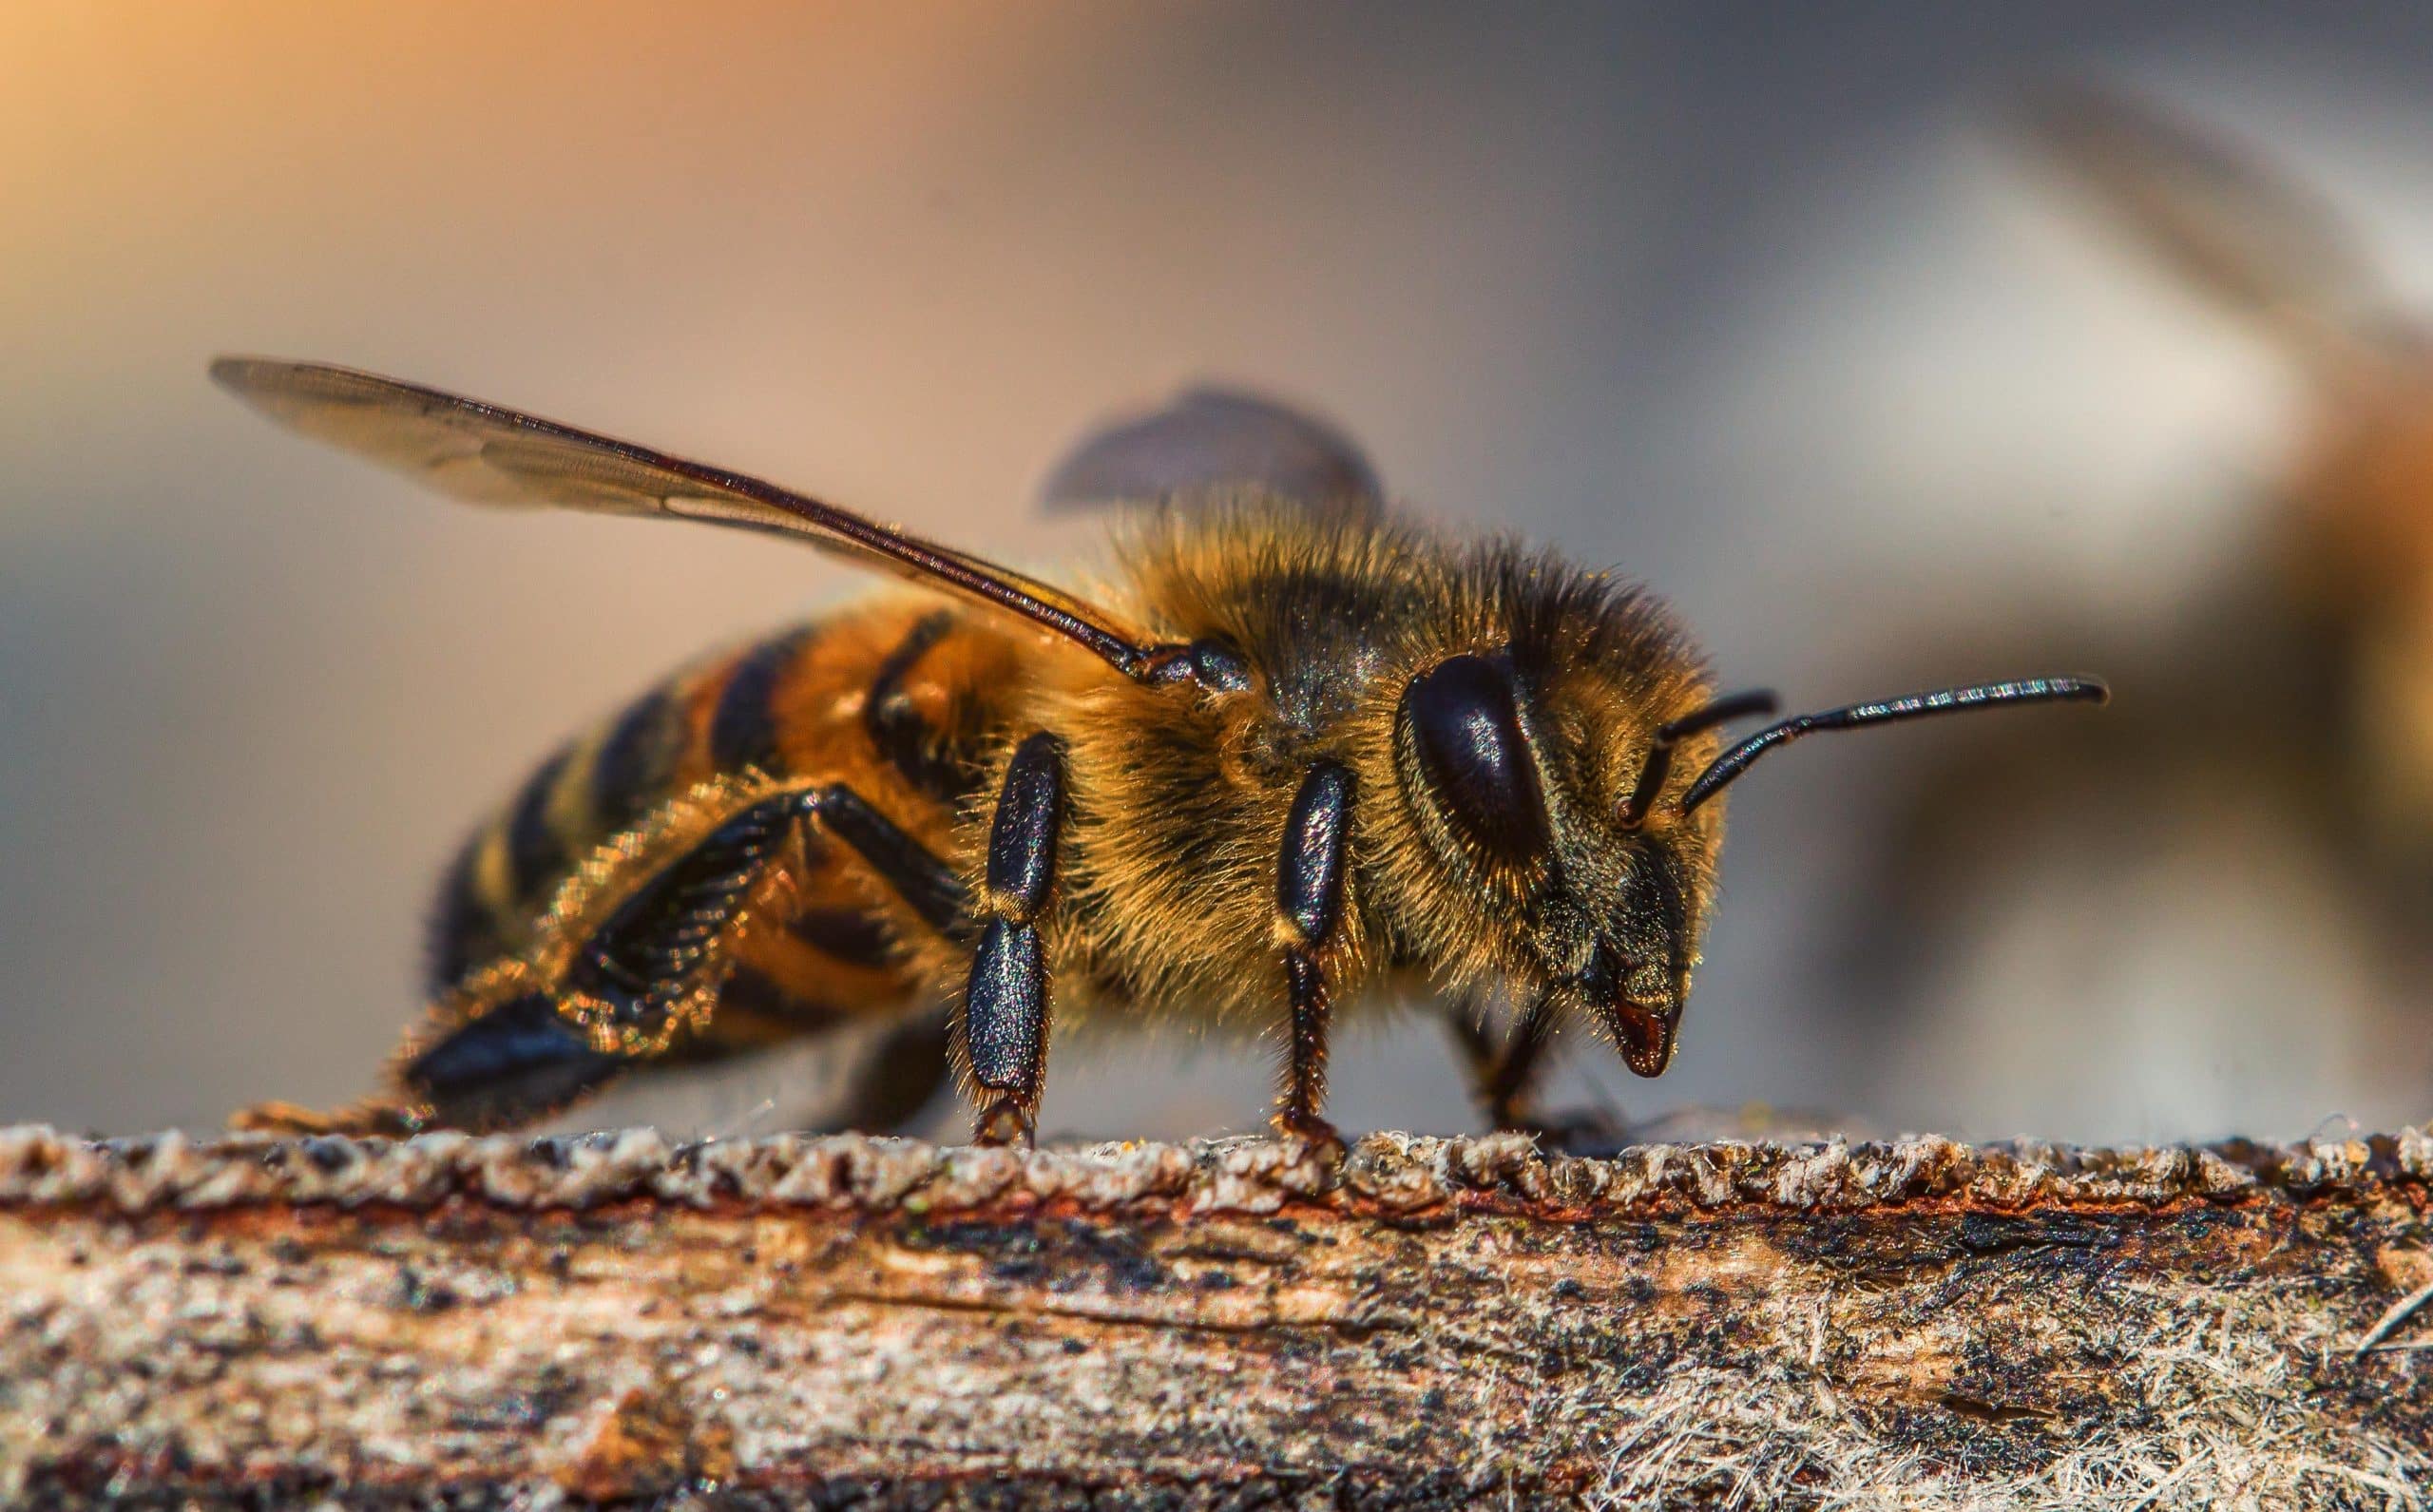 How to deal with a bee sting in the wild